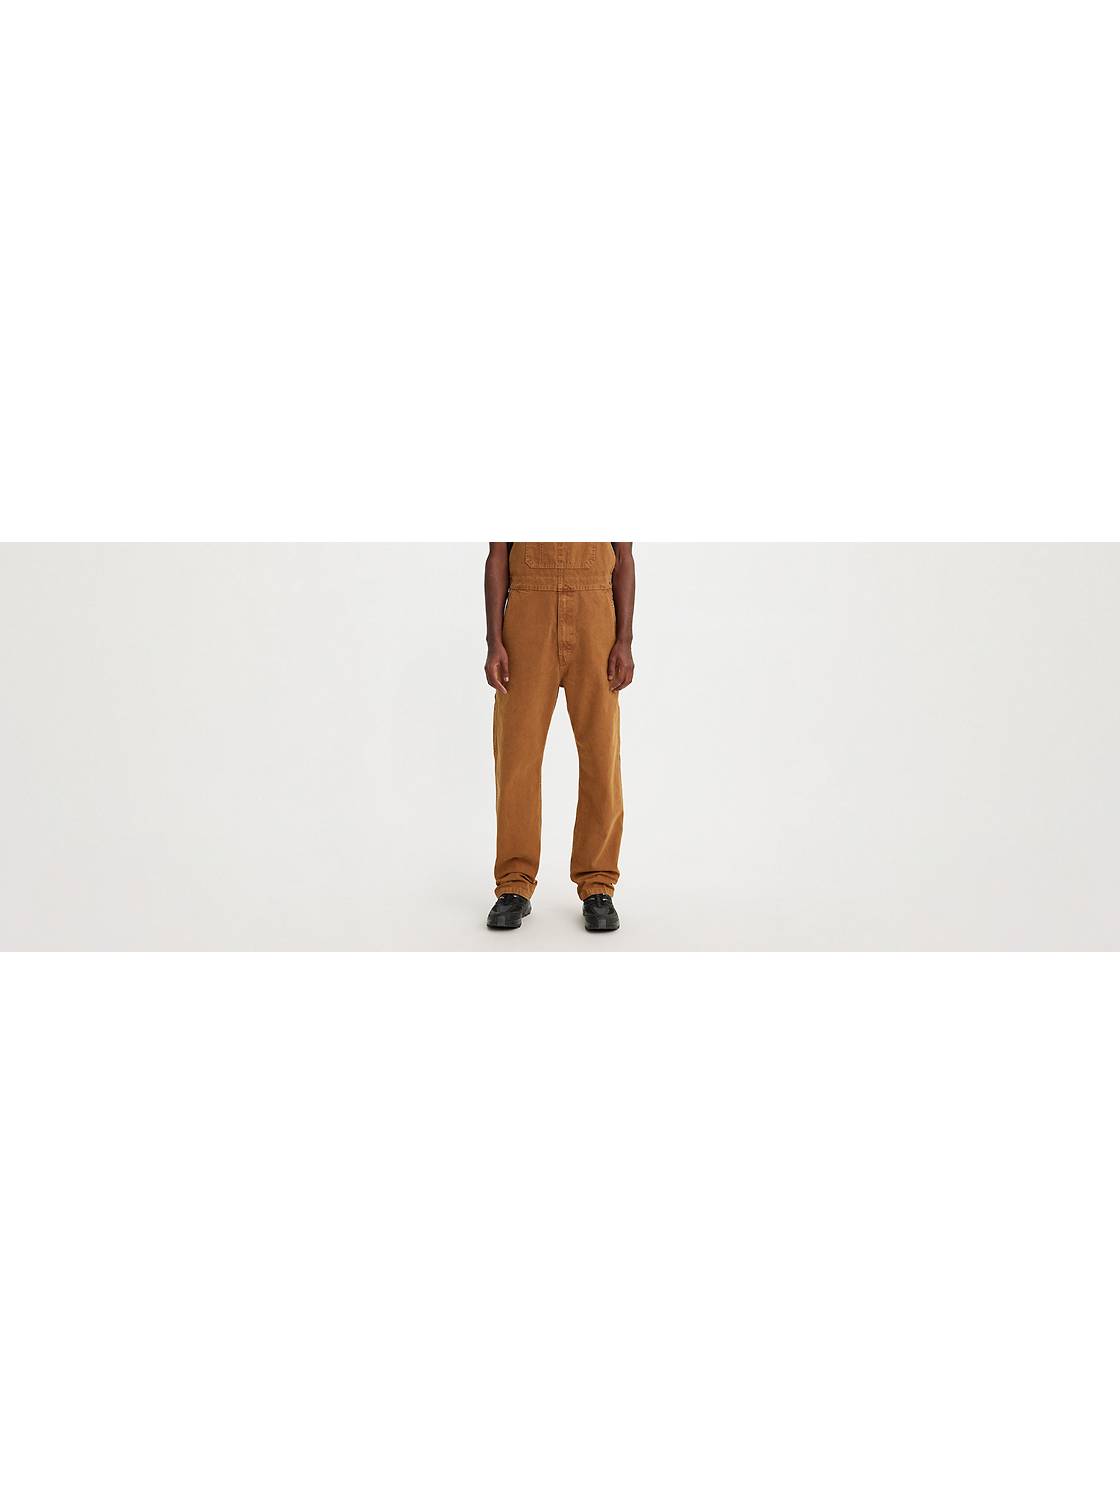 Red Tab™ Men's Overalls - Brown